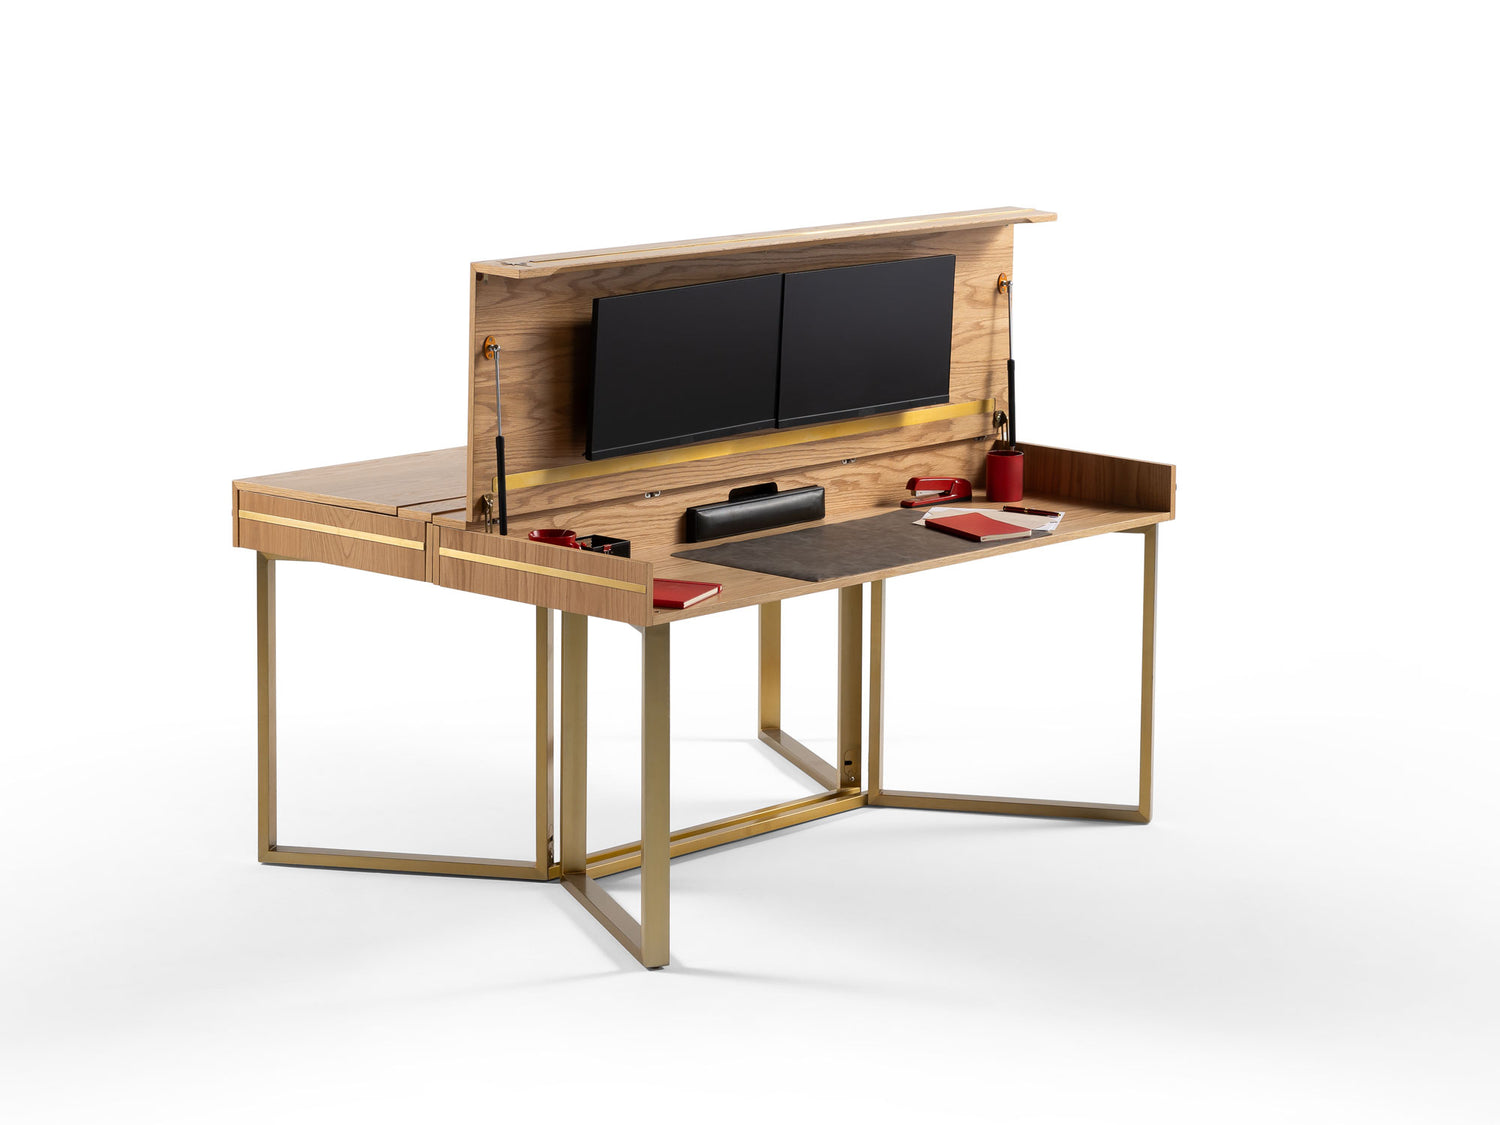 Double::Gallery::Transformer Desk-to-Table - The Savouring